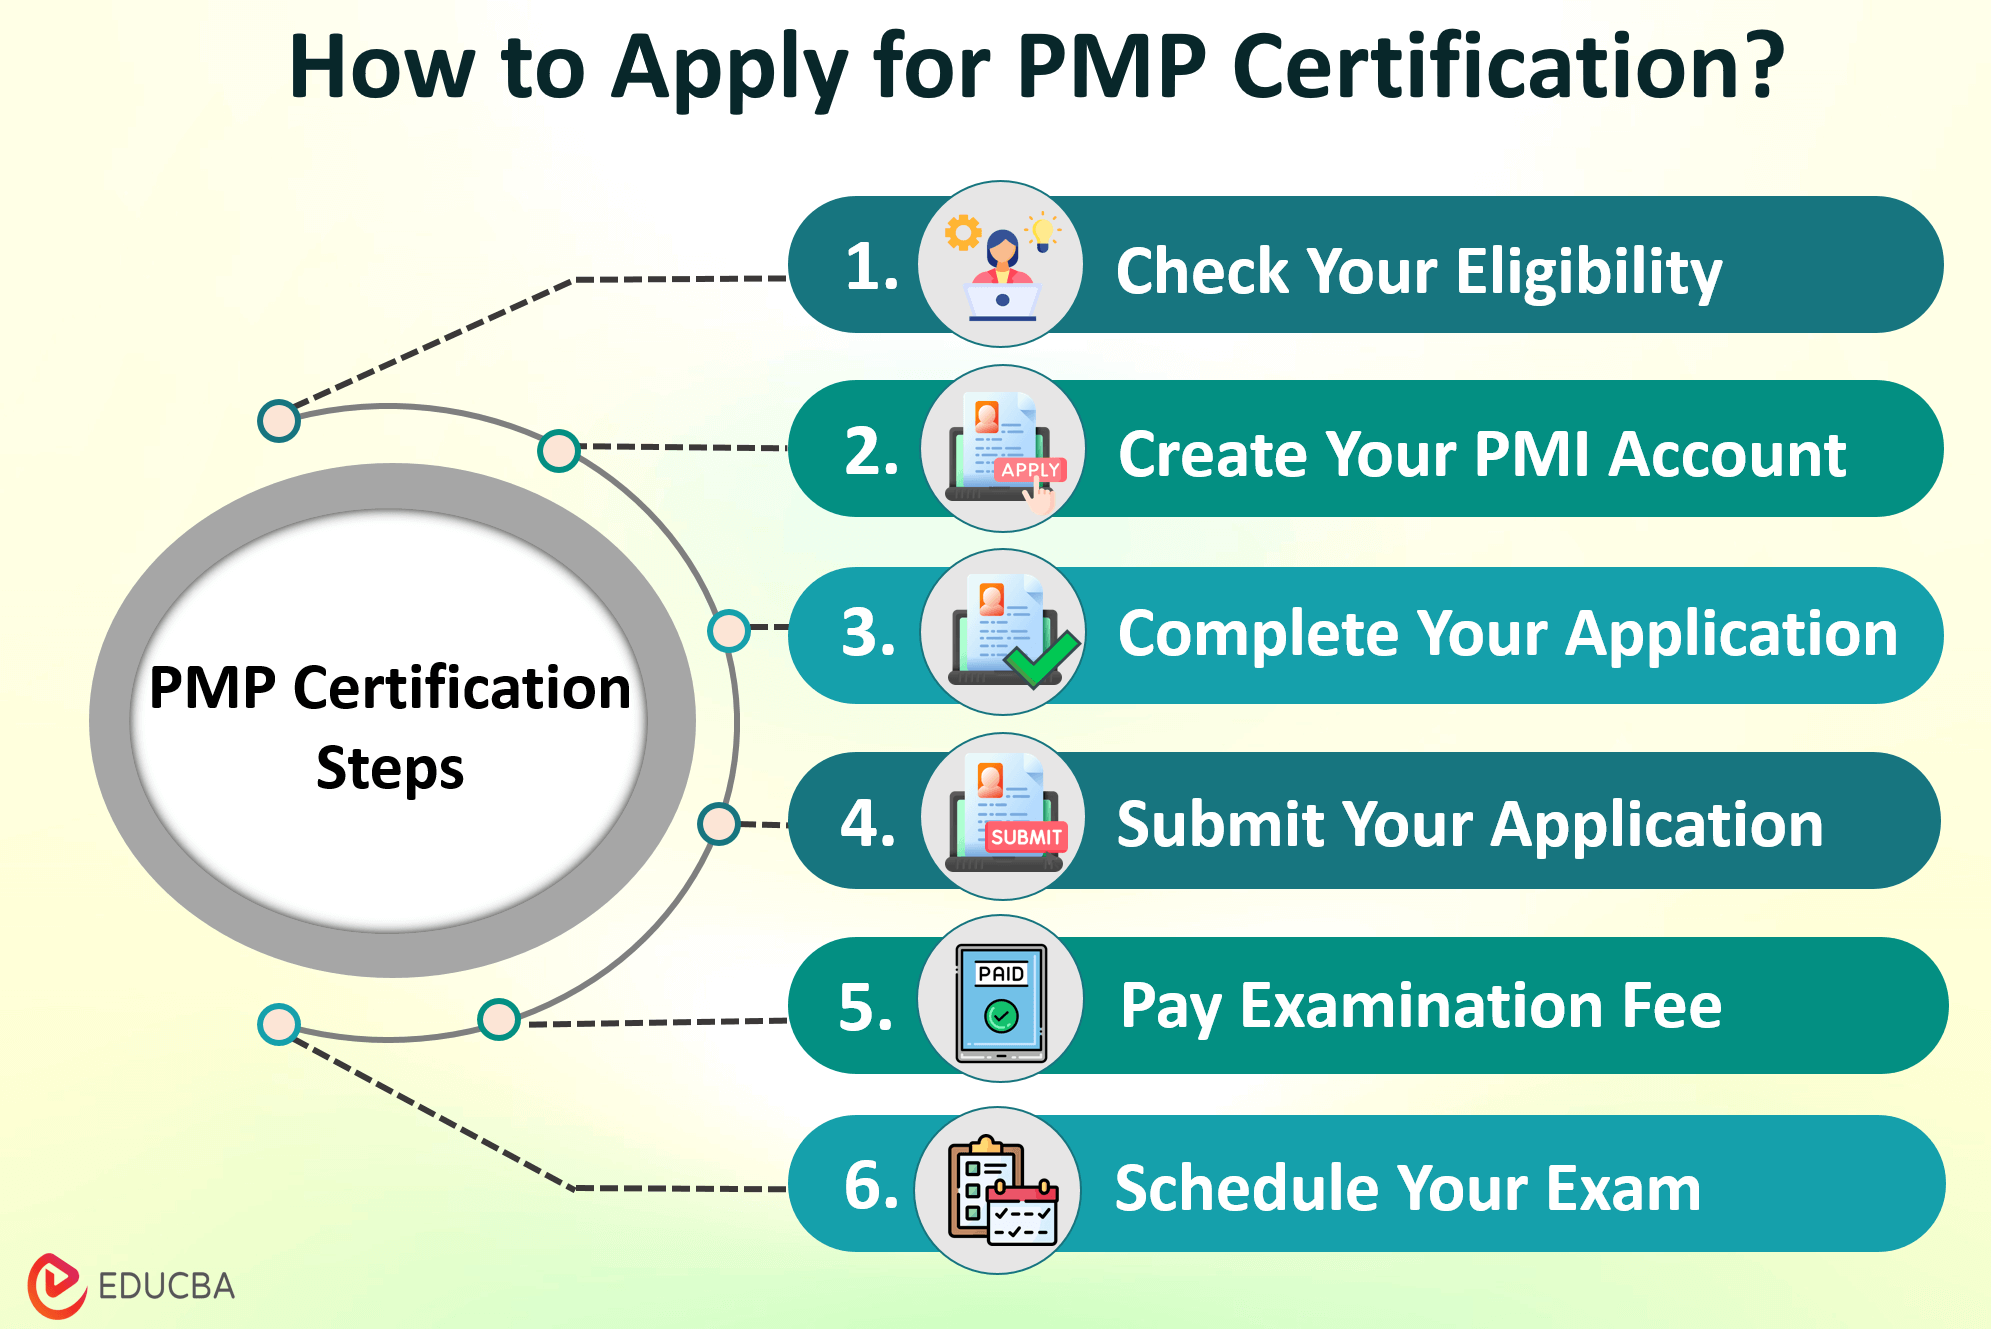 How to Apply for PMP Certification